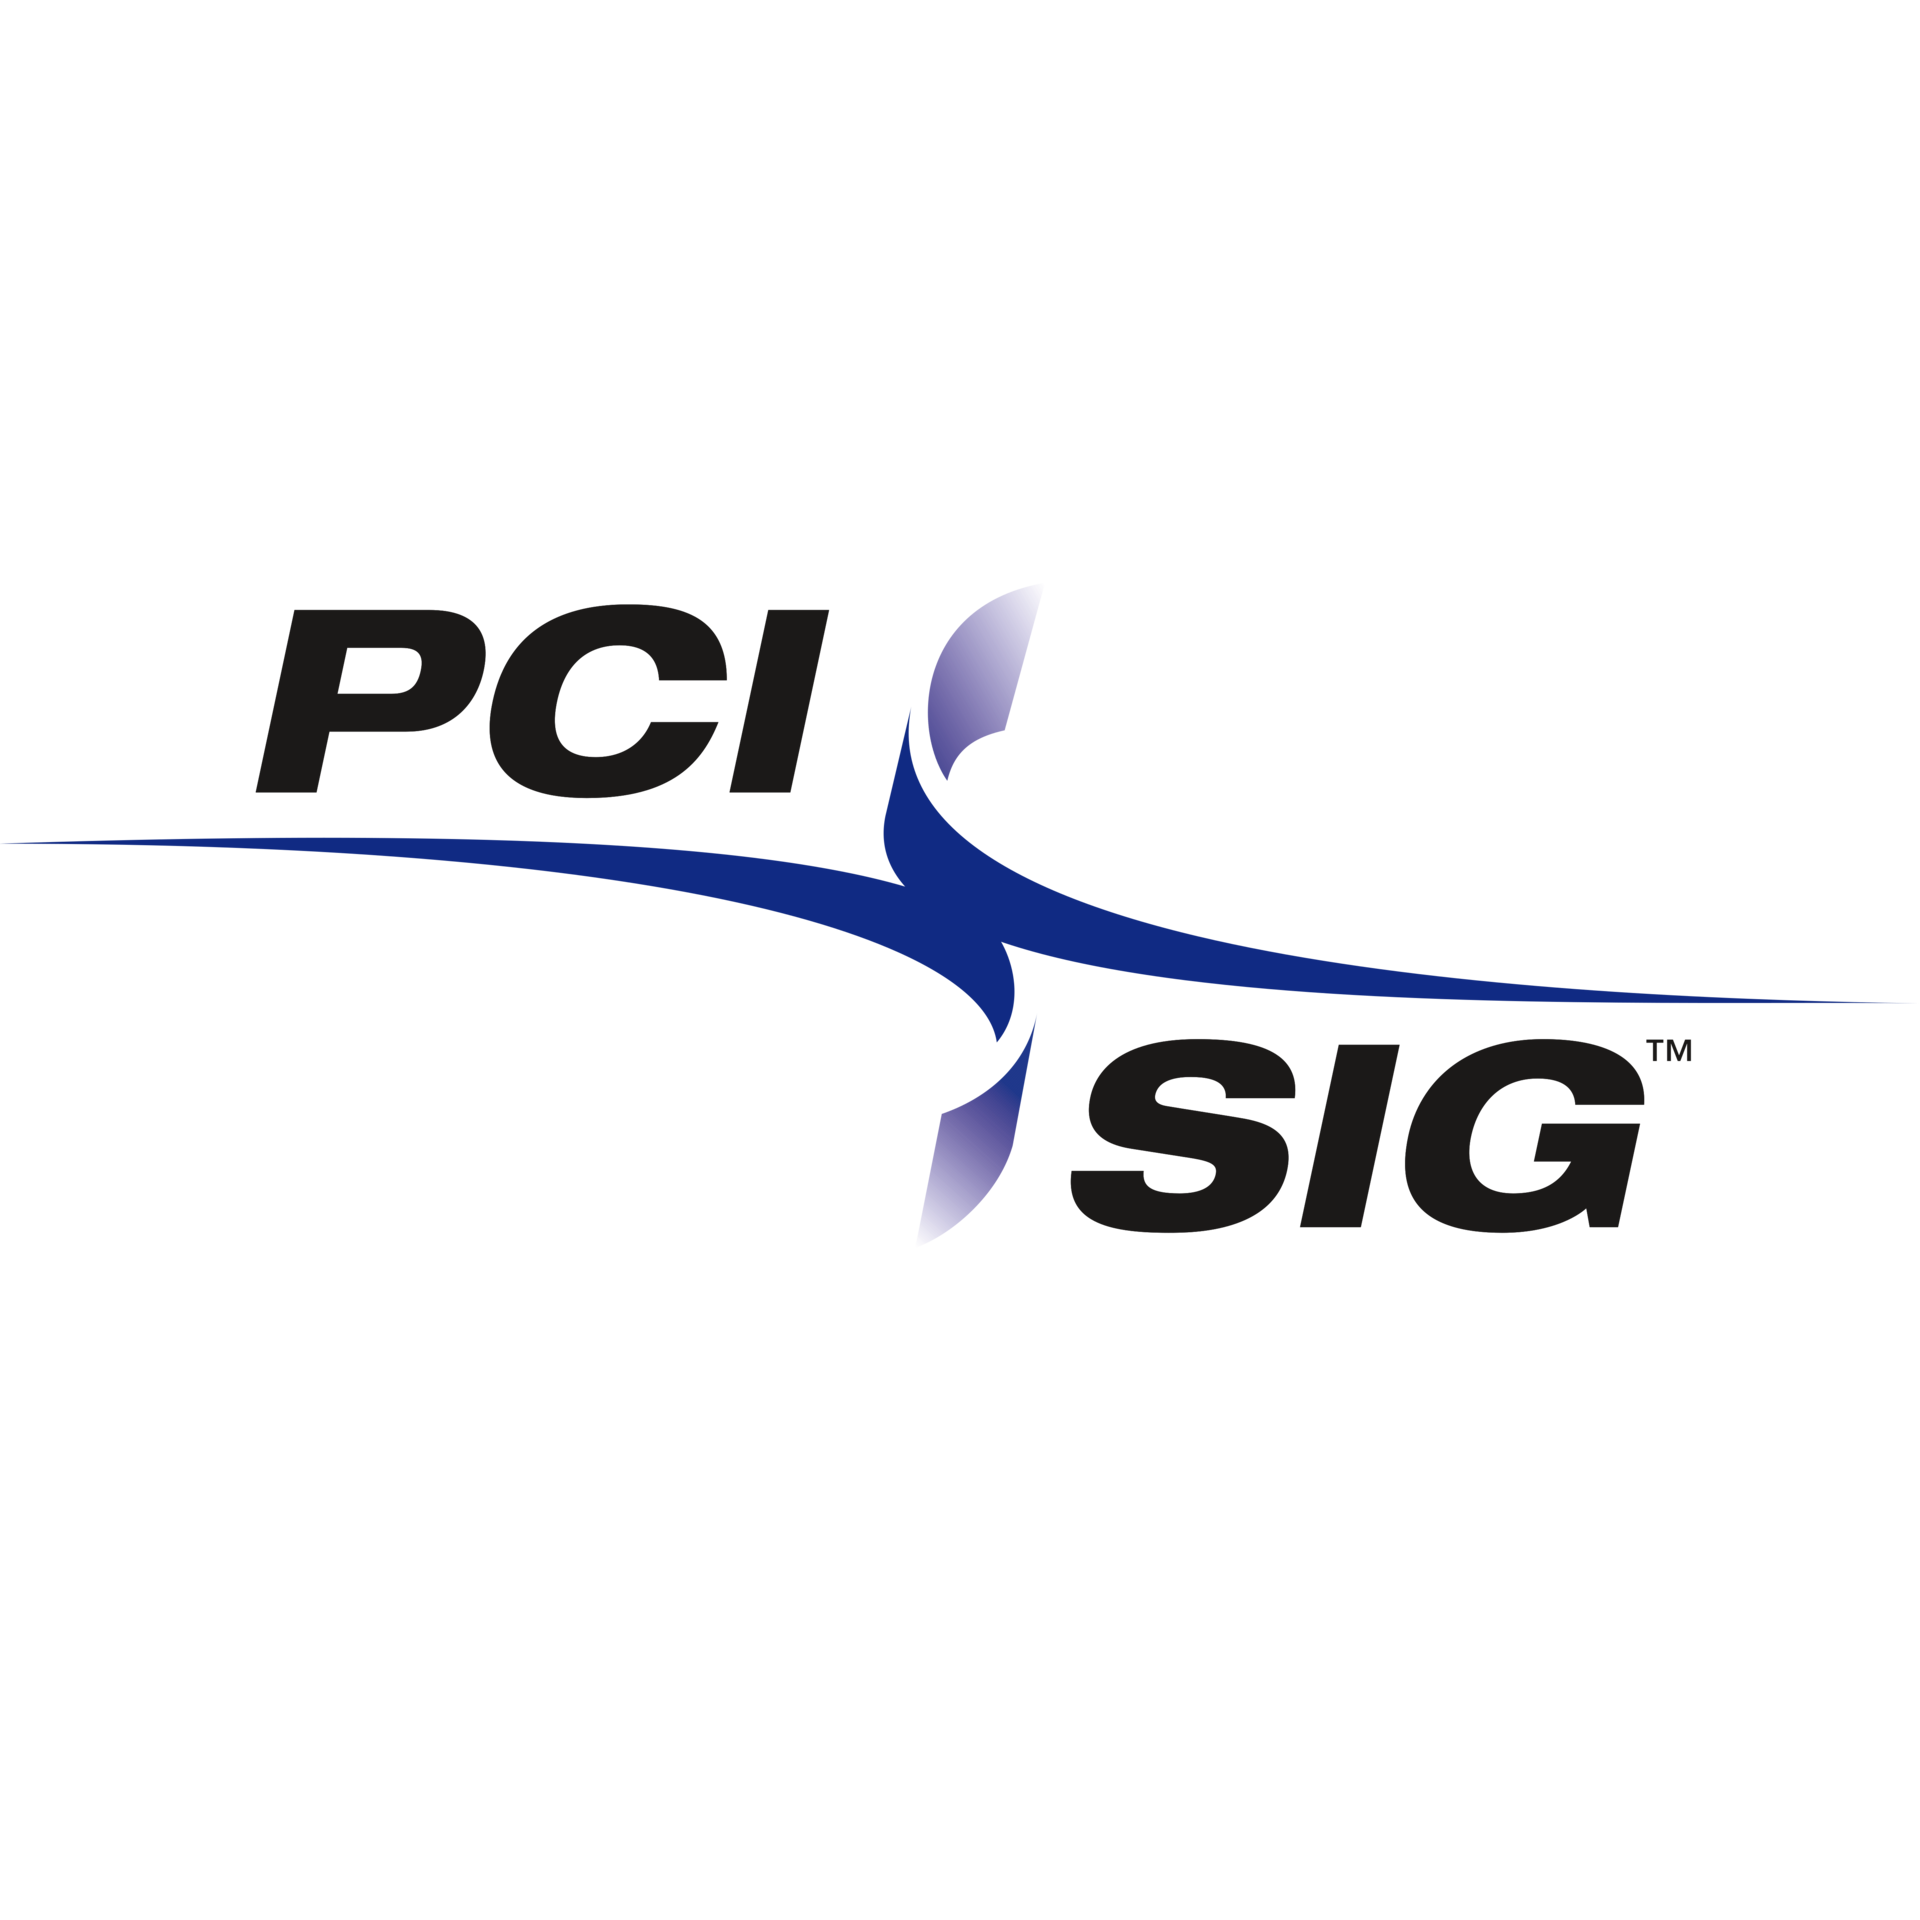 Logo of the PCI Special Interest Group PCI-SIG®